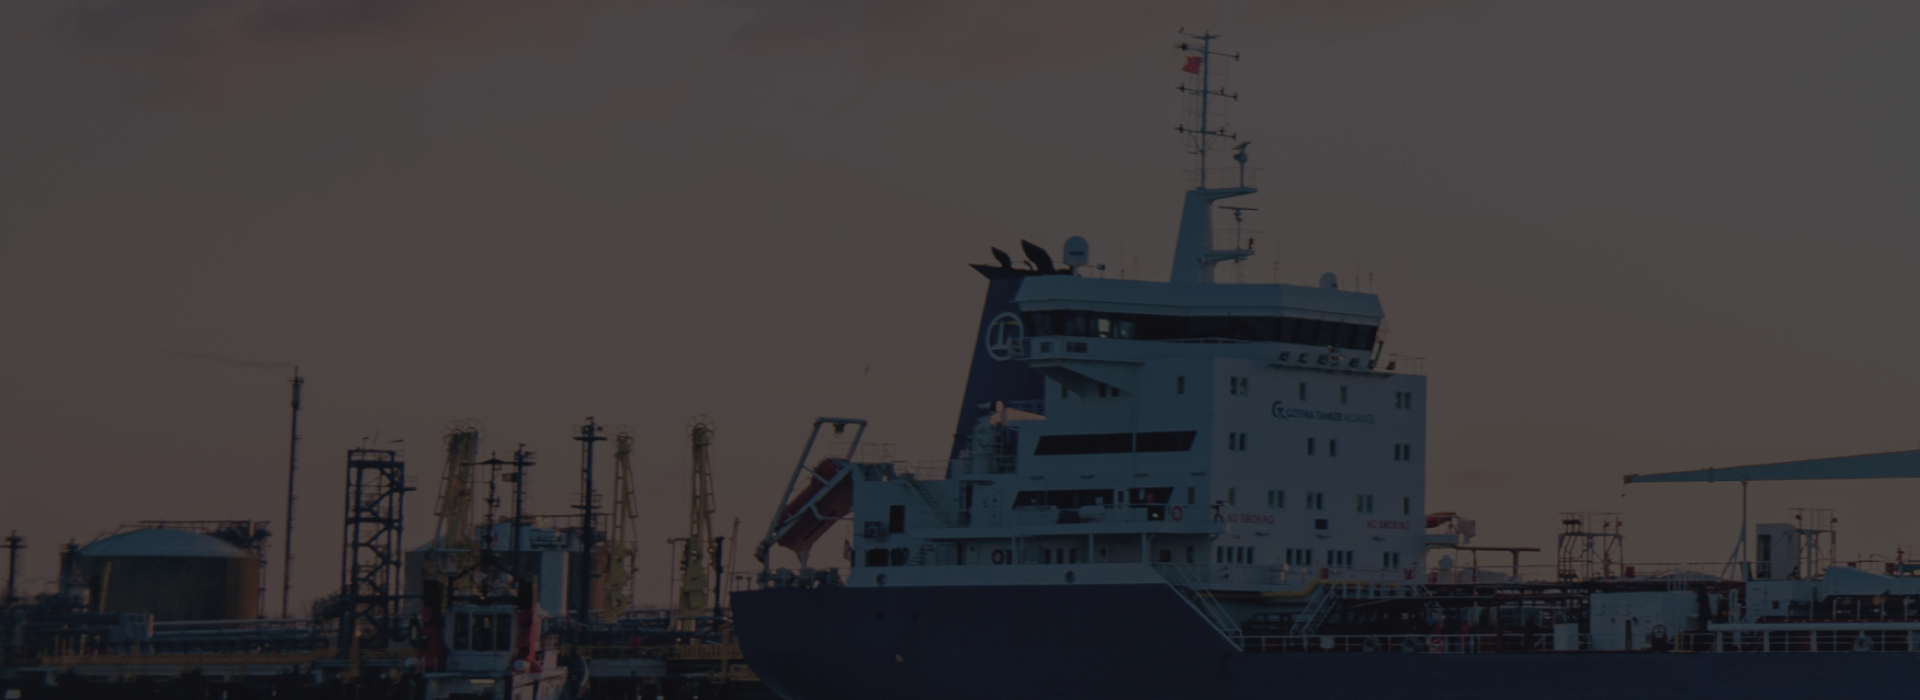 Piesoft. Data security solution for ships